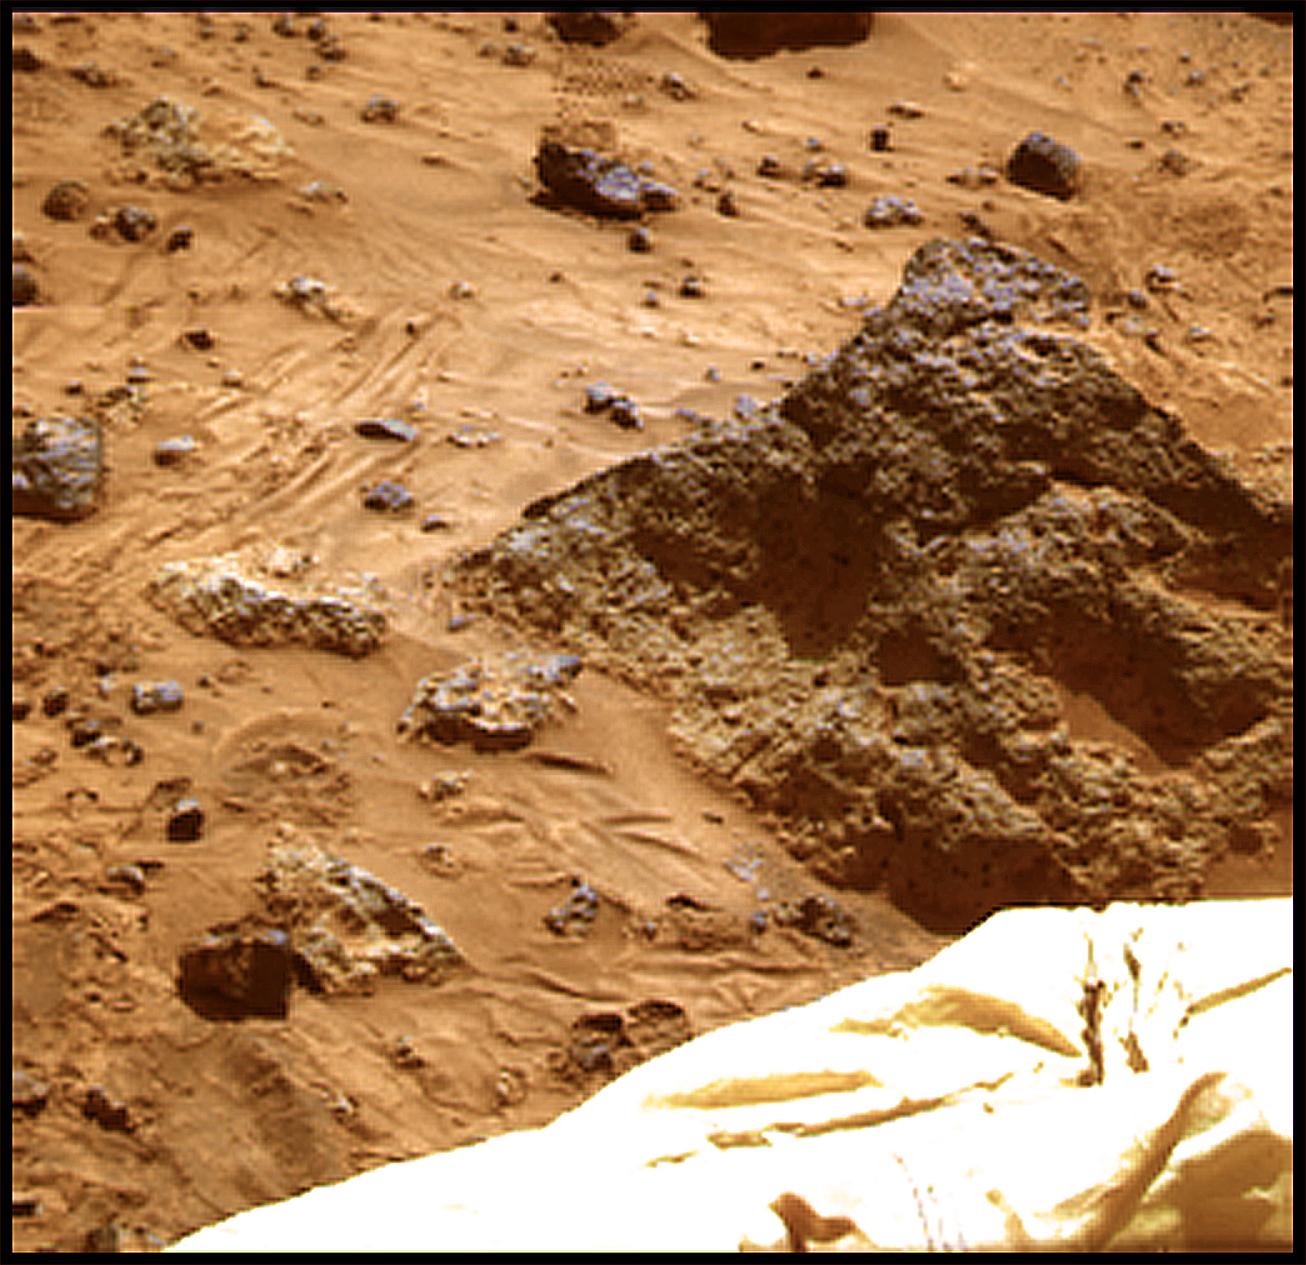 The 'Mini Matterhorn' is a 3/4 meter rock immediately east-southeast of NASA's Mars Pathfinder lander. This image was produced by combining the 'Super pan' frames from the IMP camera. Sol 1 began on July 4, 1997.